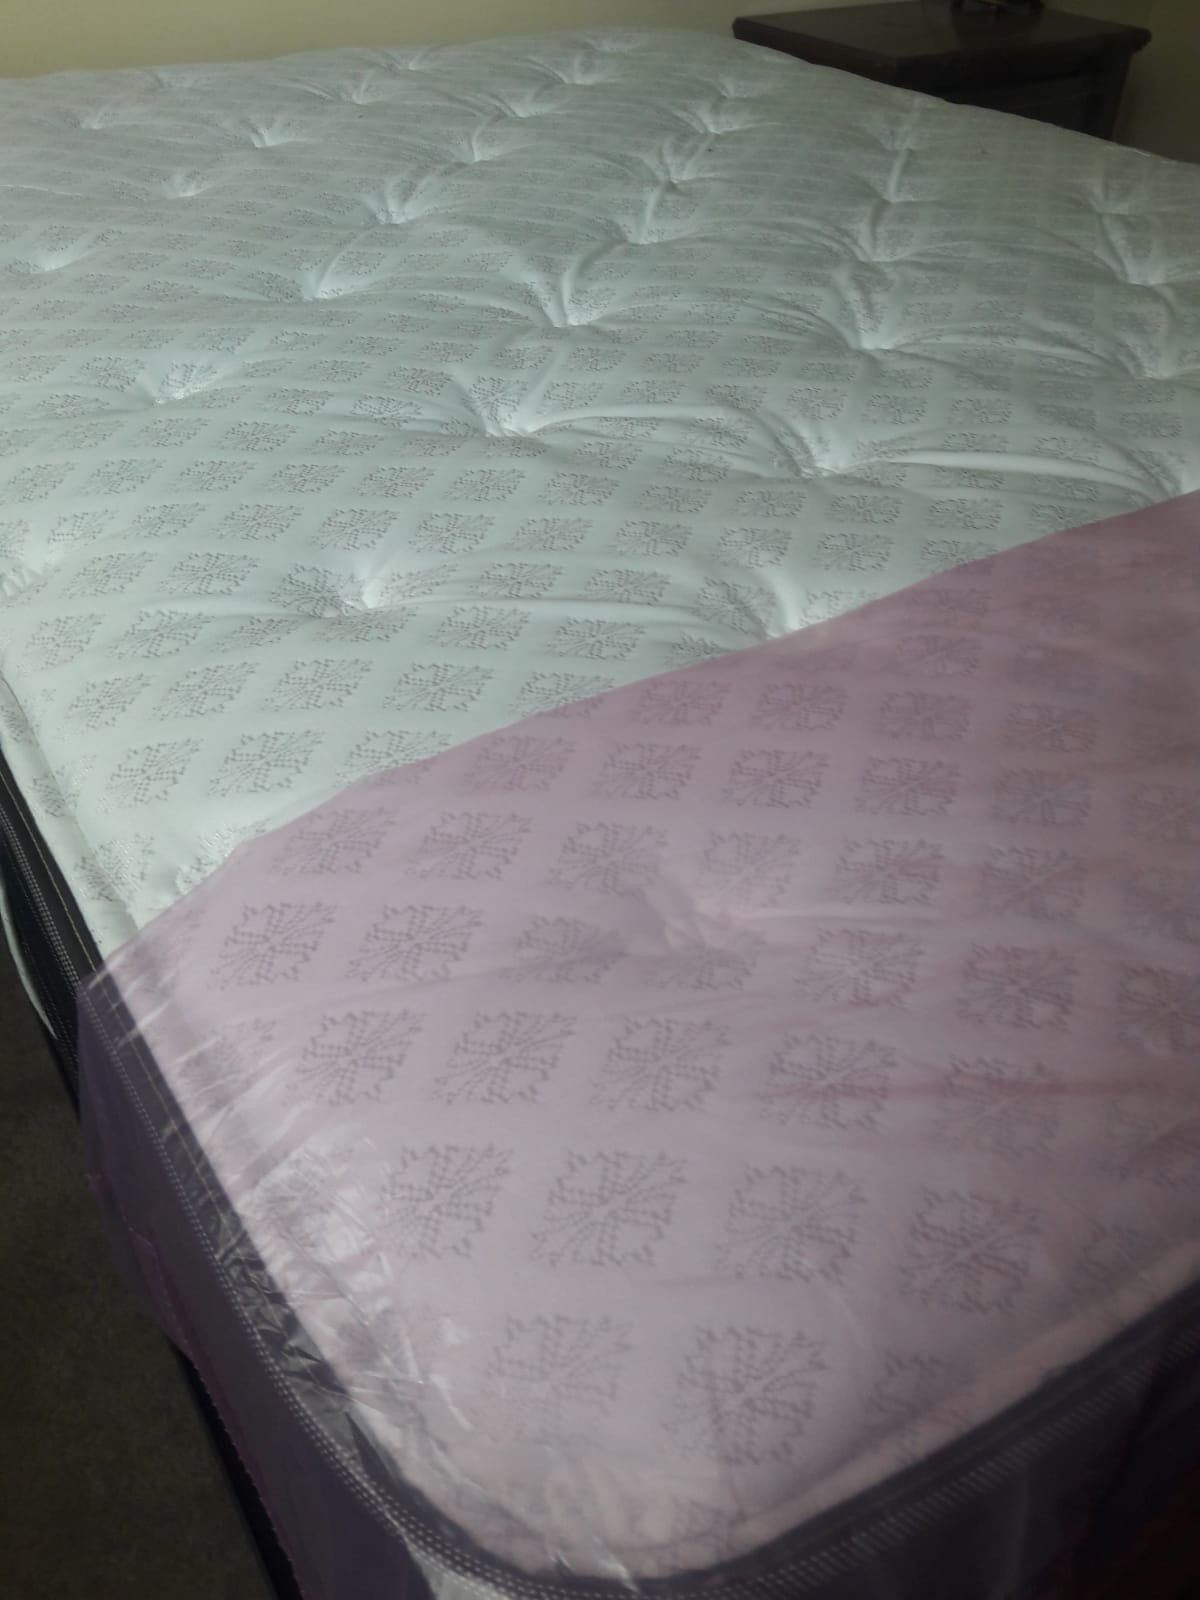 NEW QUEEN MATTRESS 13 INCHES HIGH AND BOX SPRING INCLUDED, FREE DELIVERY WPB AREA